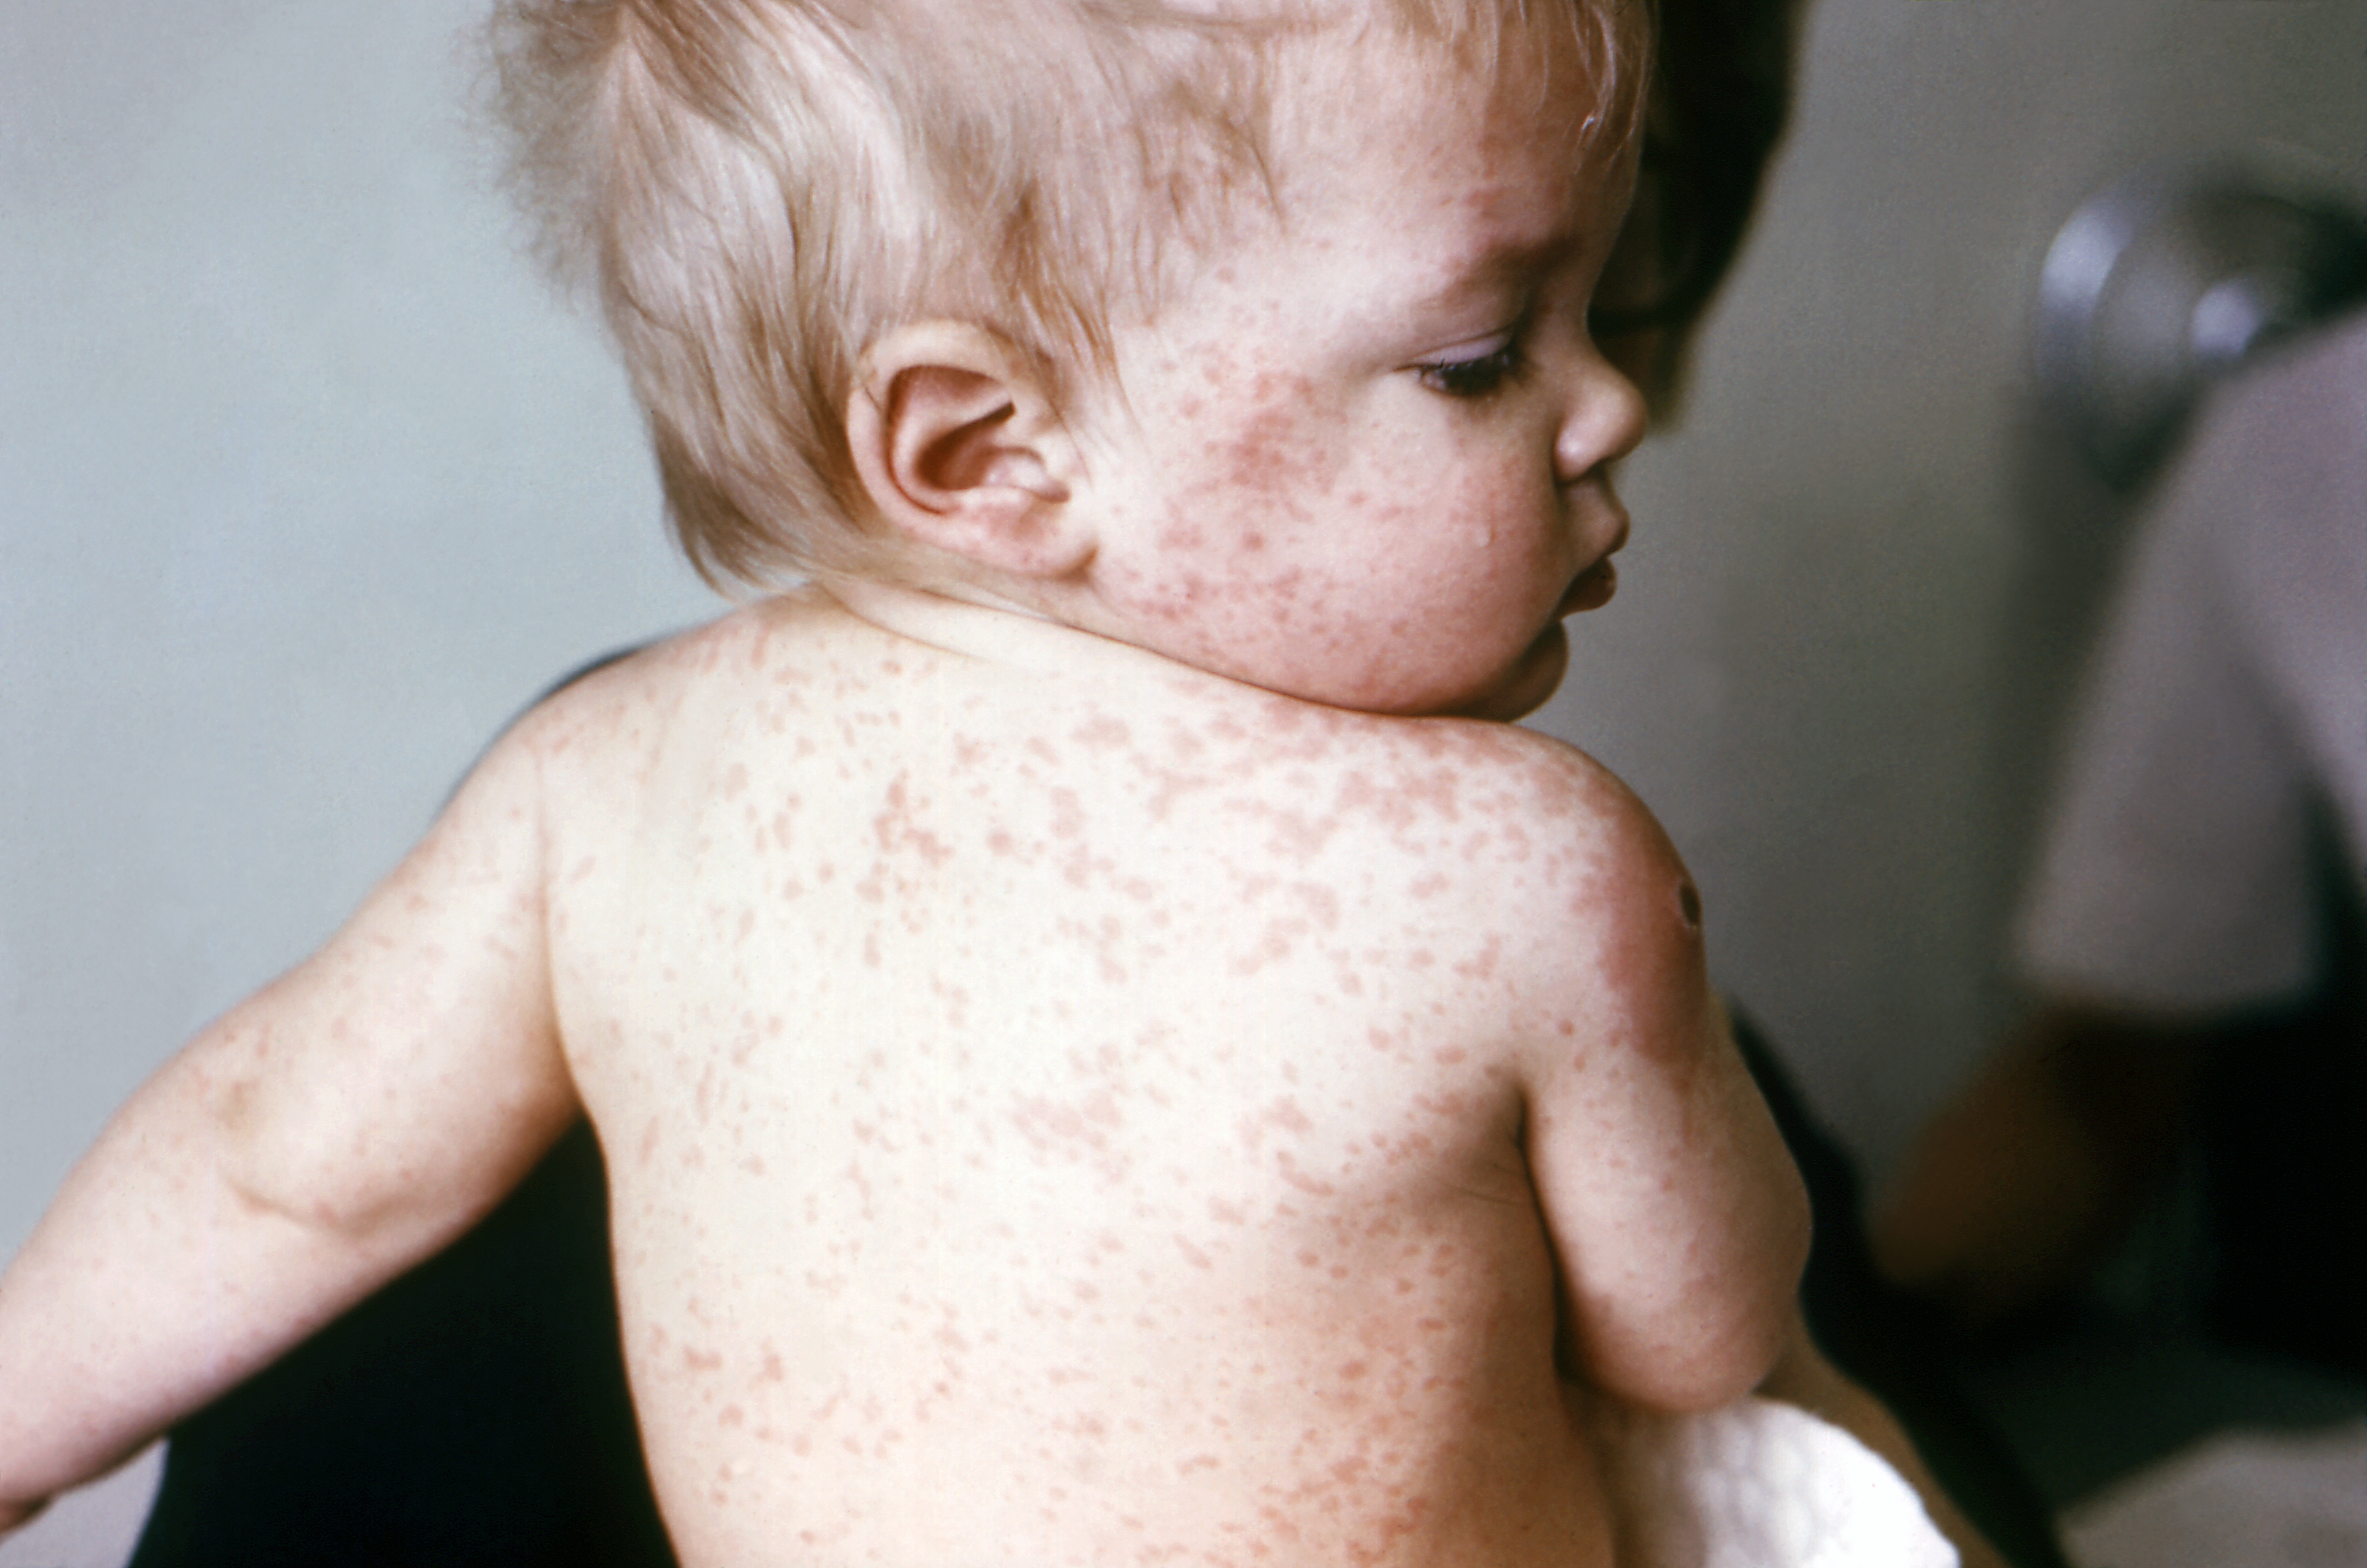 Measles Have Infected Up to 121 People in 17 States So Far As of February 6th 2015